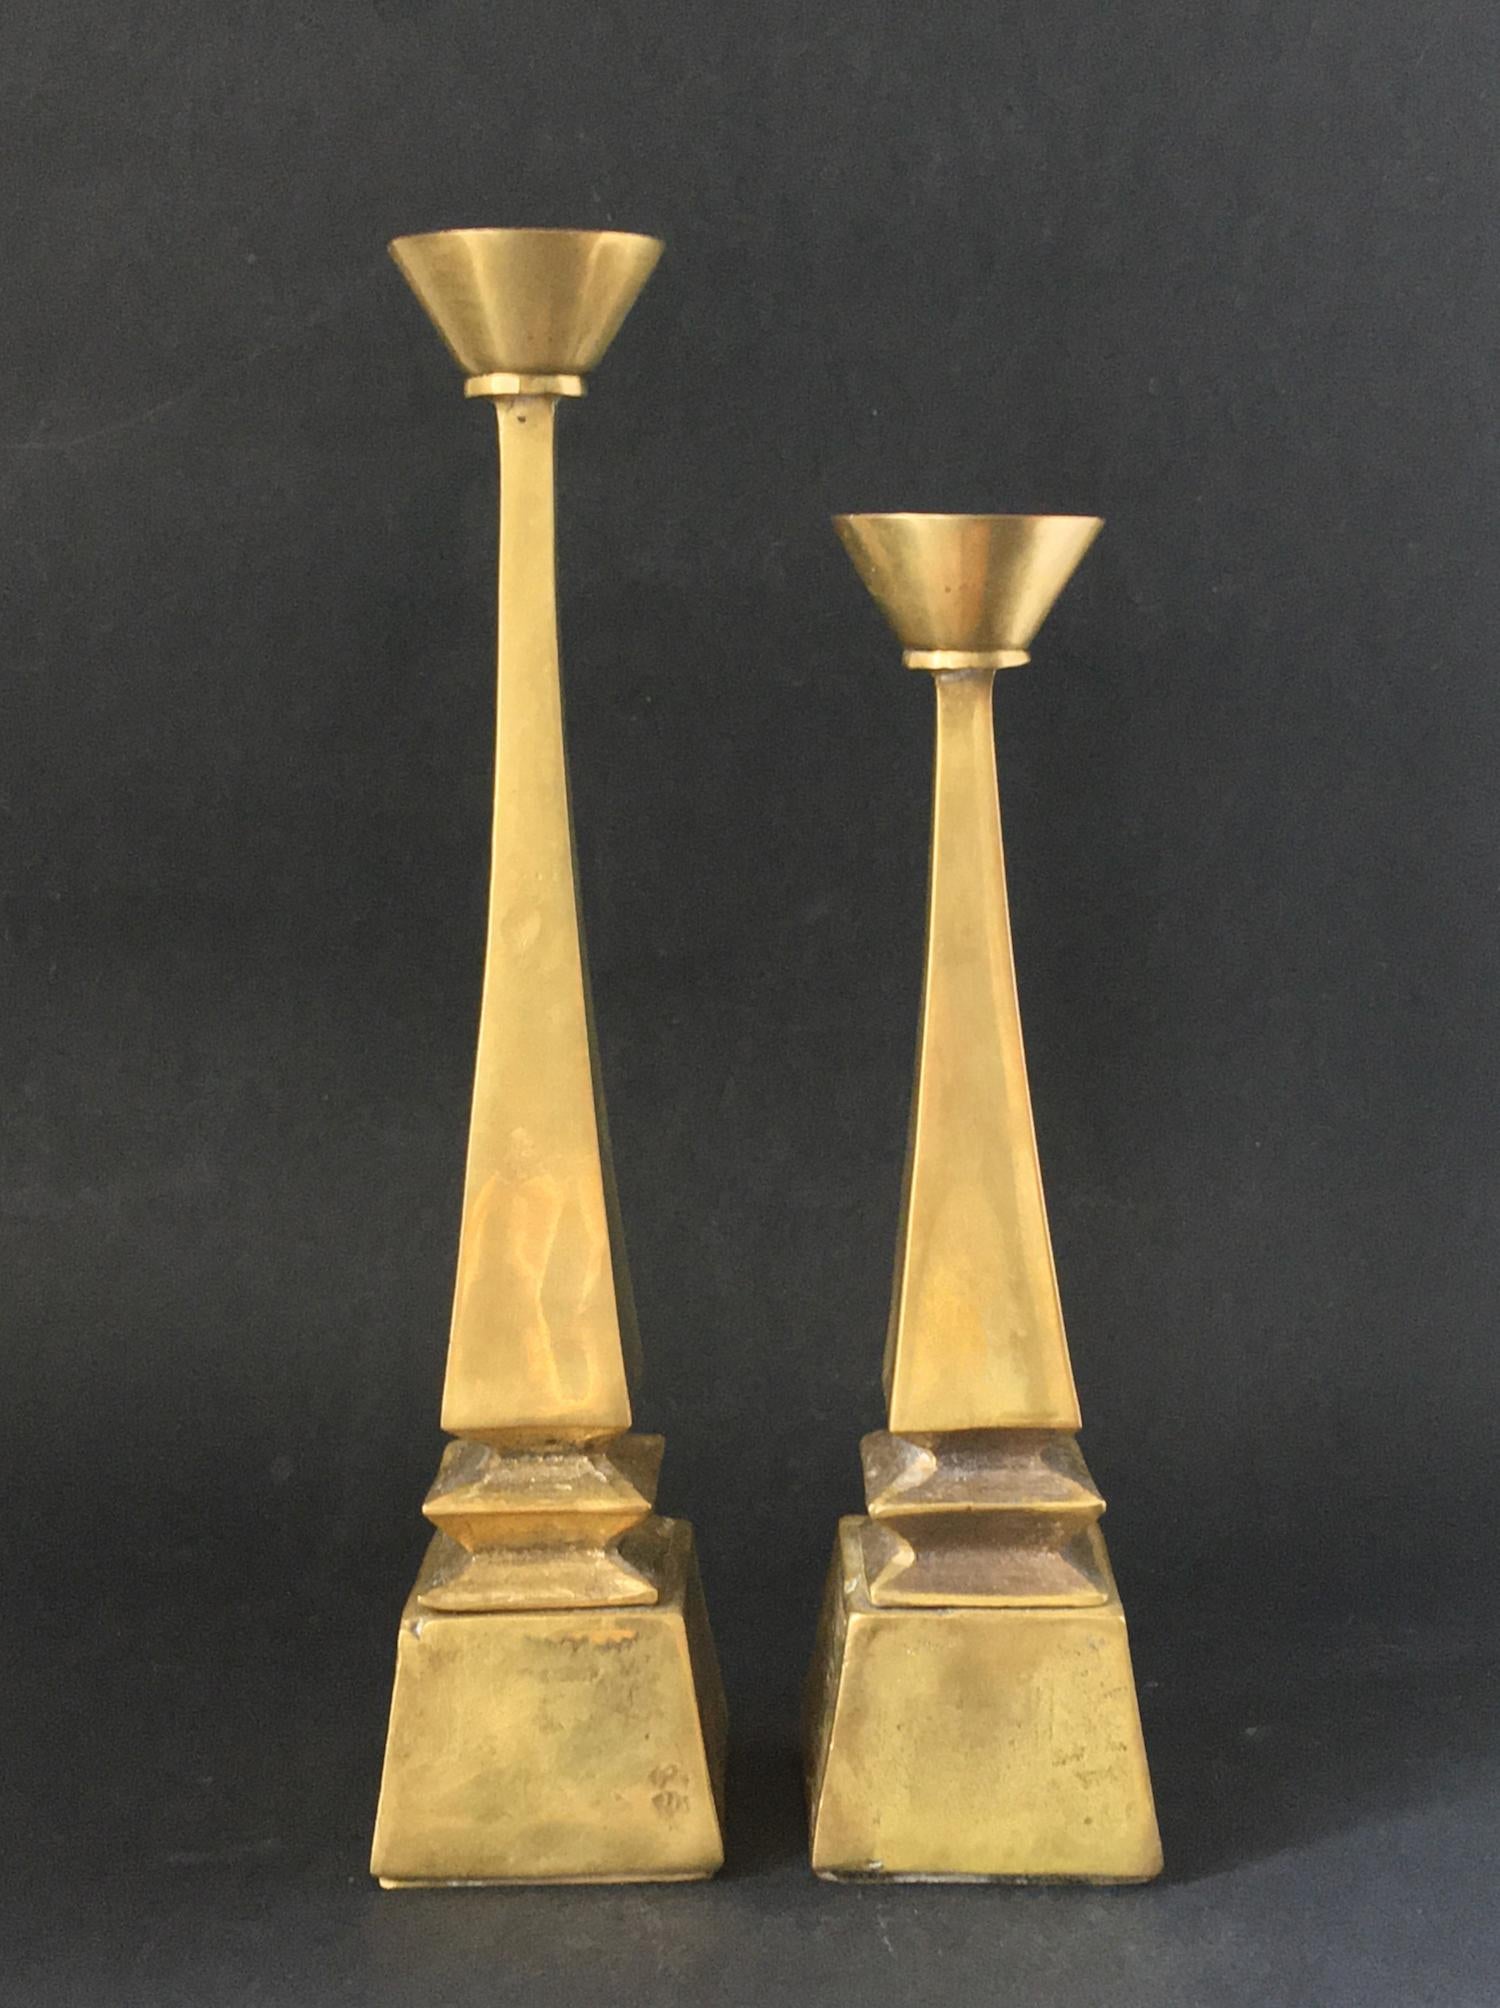 Set of two brass candleholders. Found in Germany, second half 20th century.

The cast brass components show nice combinations of smooth and rough textures, and visible asymmetry and imperfections from the casting process. There are small differences